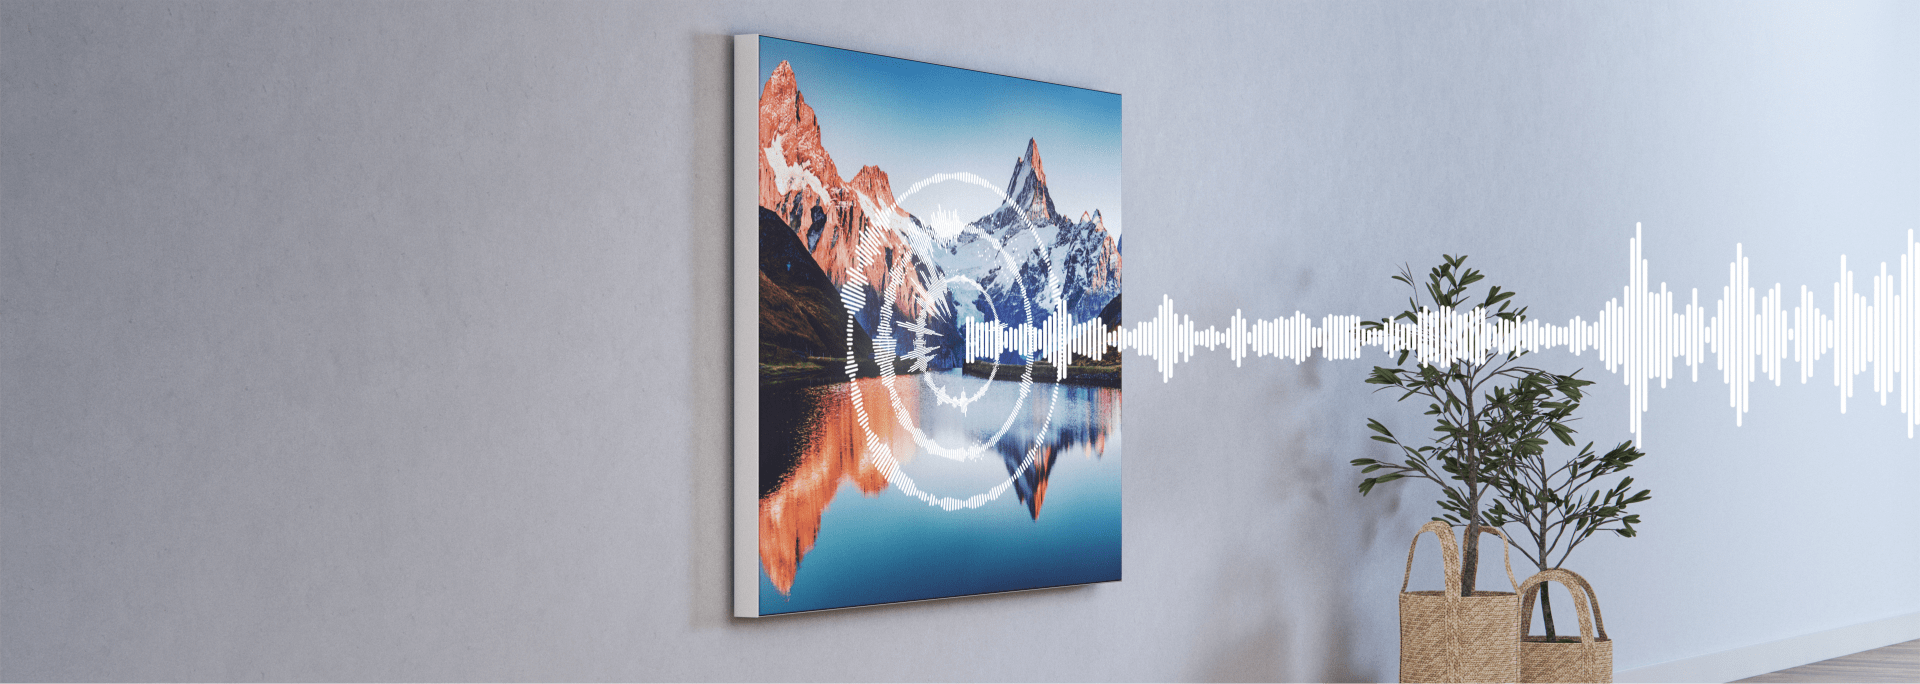 Sound-absorbing dabso frame